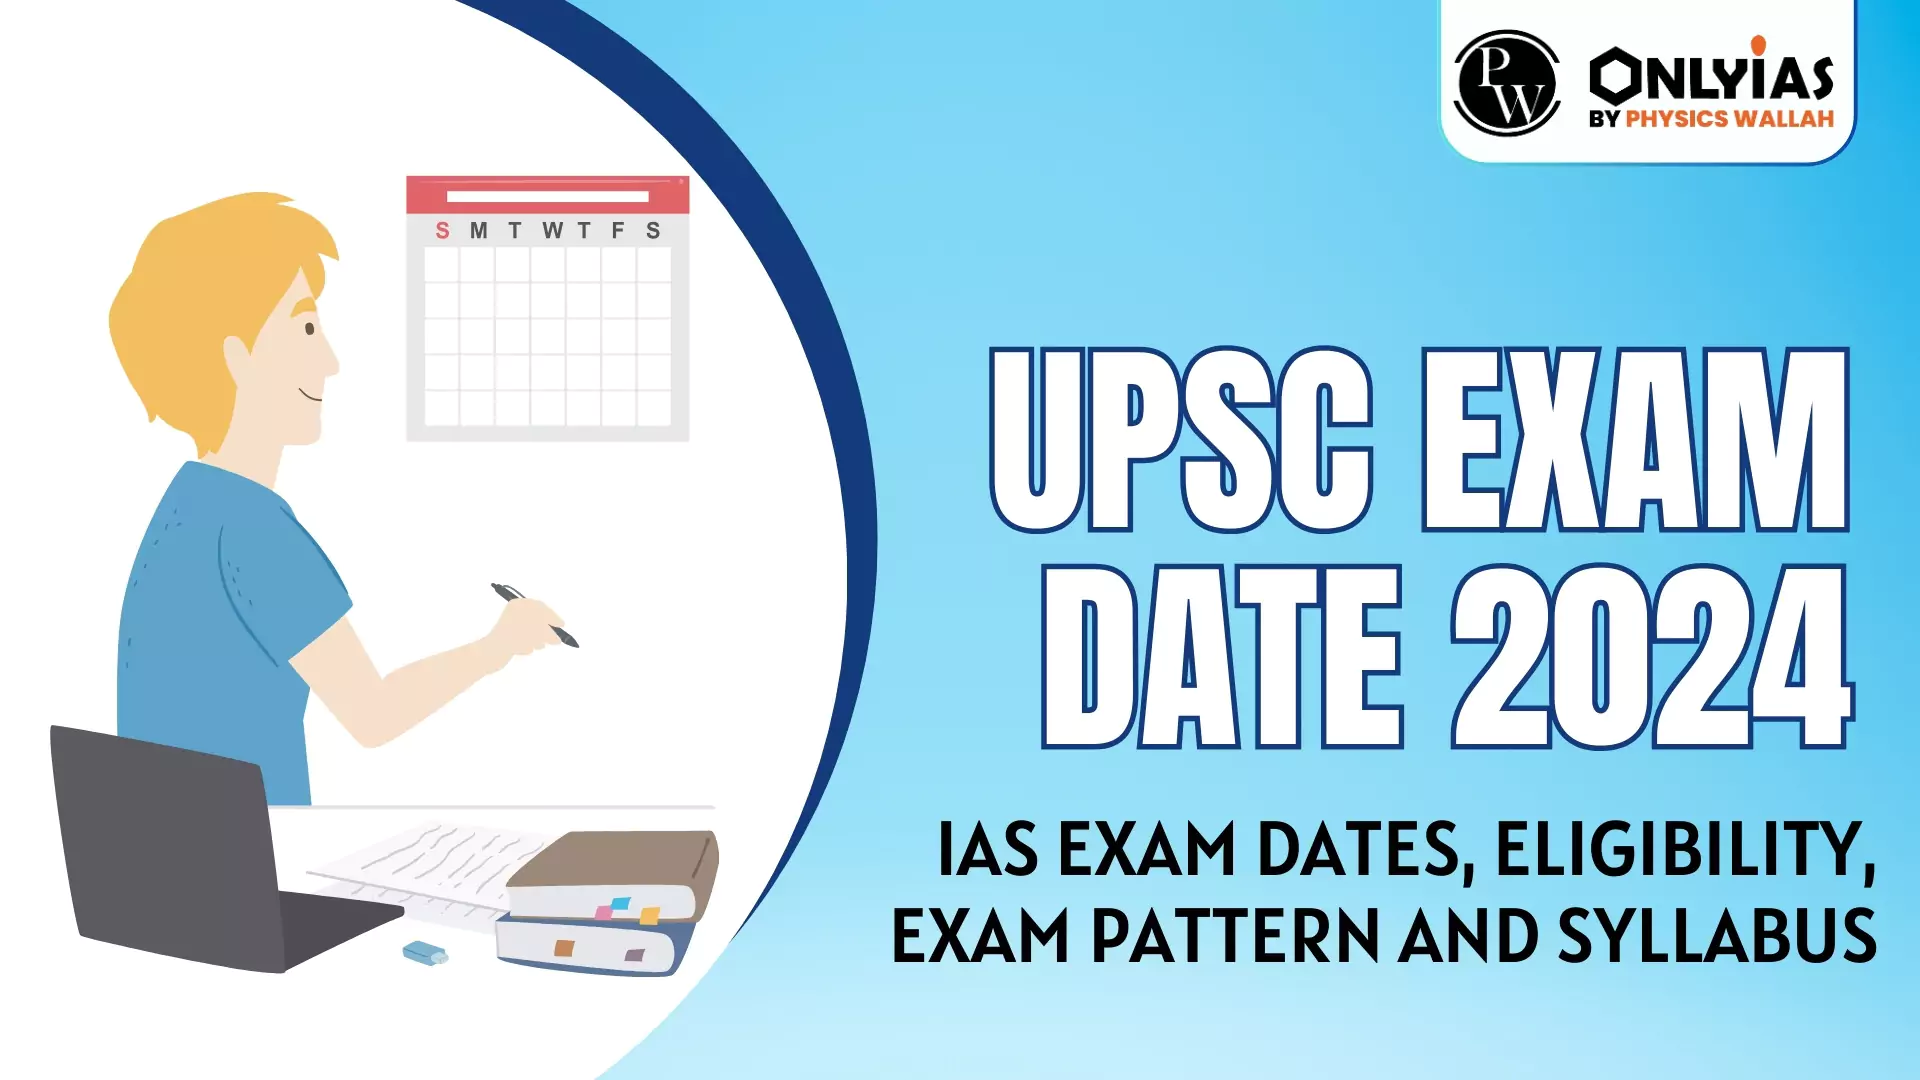 UPSC Exam Date 2024, Prelims, Mains, And Interview PWOnlyIAS